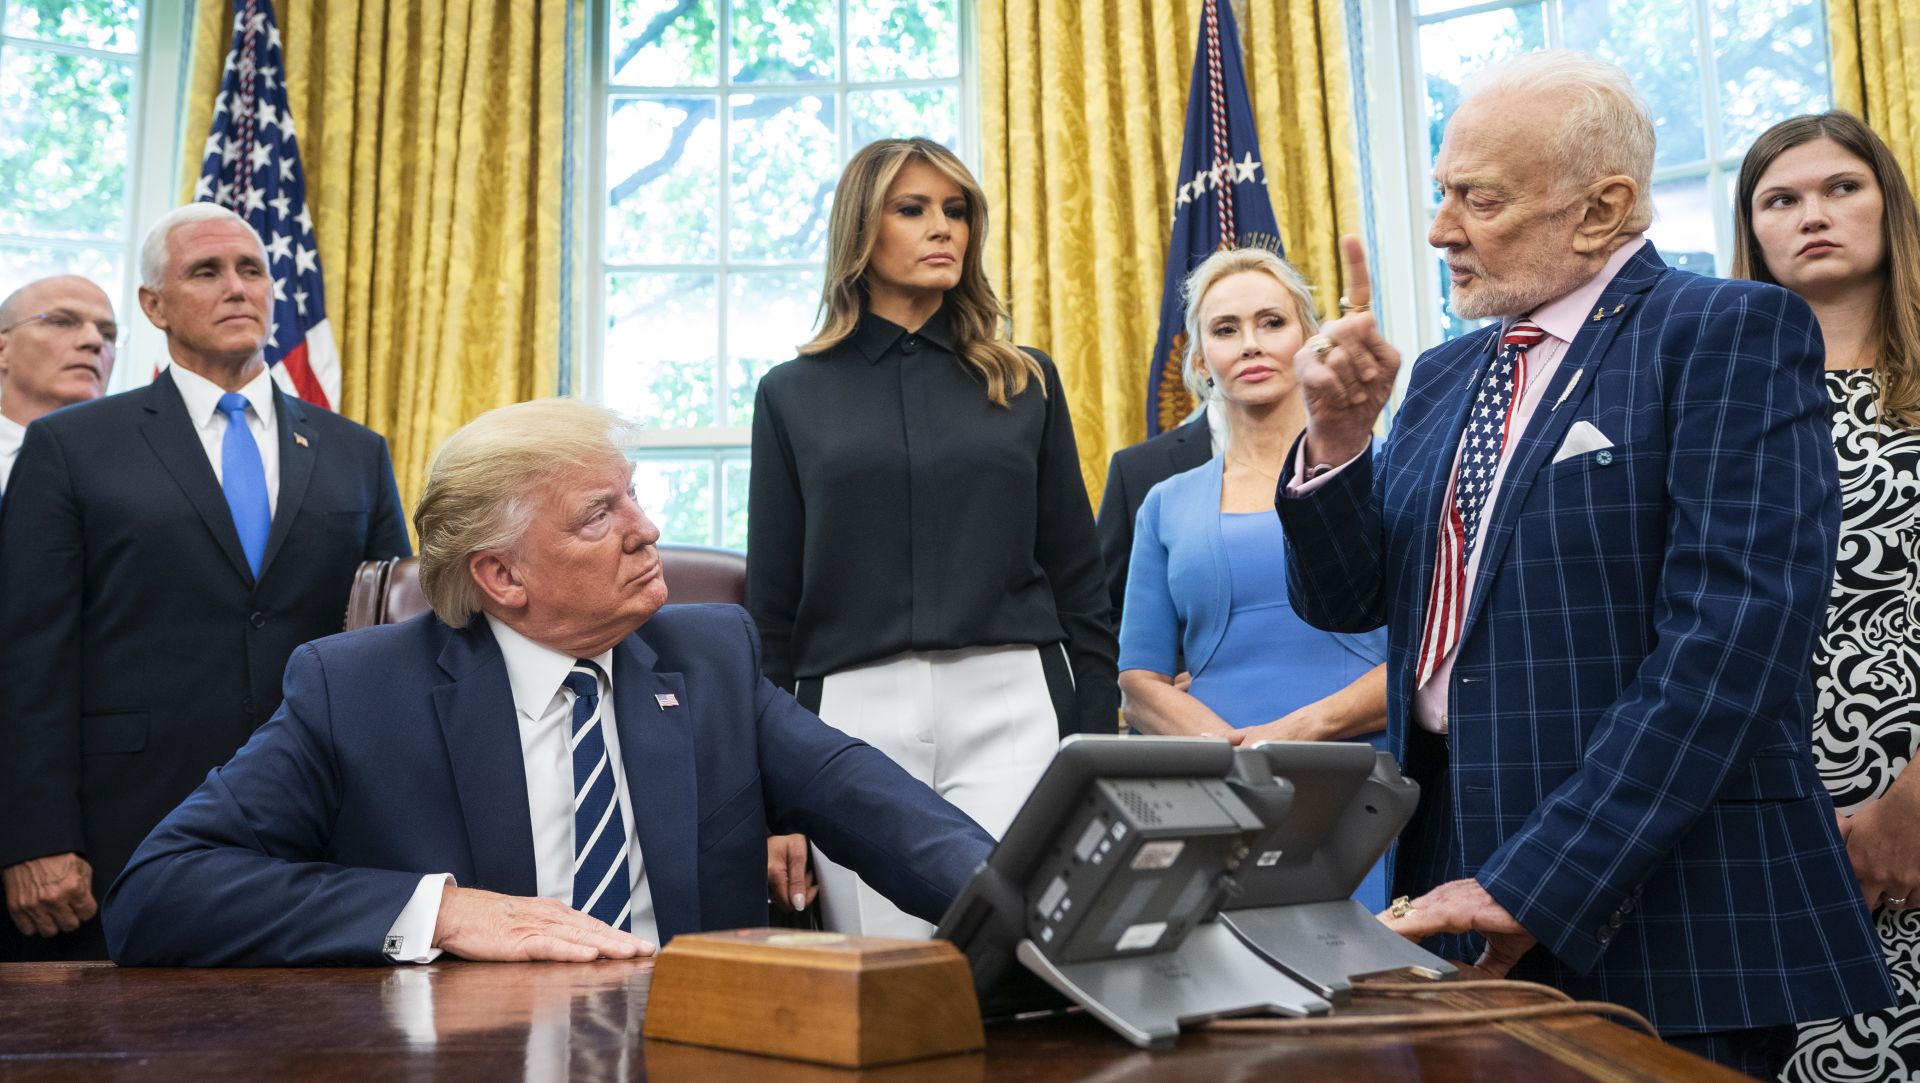 epa07727620 US President Donald J. Trump (C) welcomes astronauts Buzz Aldrin (R), Michael Collins (not pictured), and the family of Neil Armstrong to the Oval Office honor the 50th anniversary of the Apollo moon landing in the Oval Office of the White House in Washington, DC, USA, 18 July 2019. The president also answered questions about his racist tweet, and the Iranian drone shot down by American forces.  EPA/JIM LO SCALZO